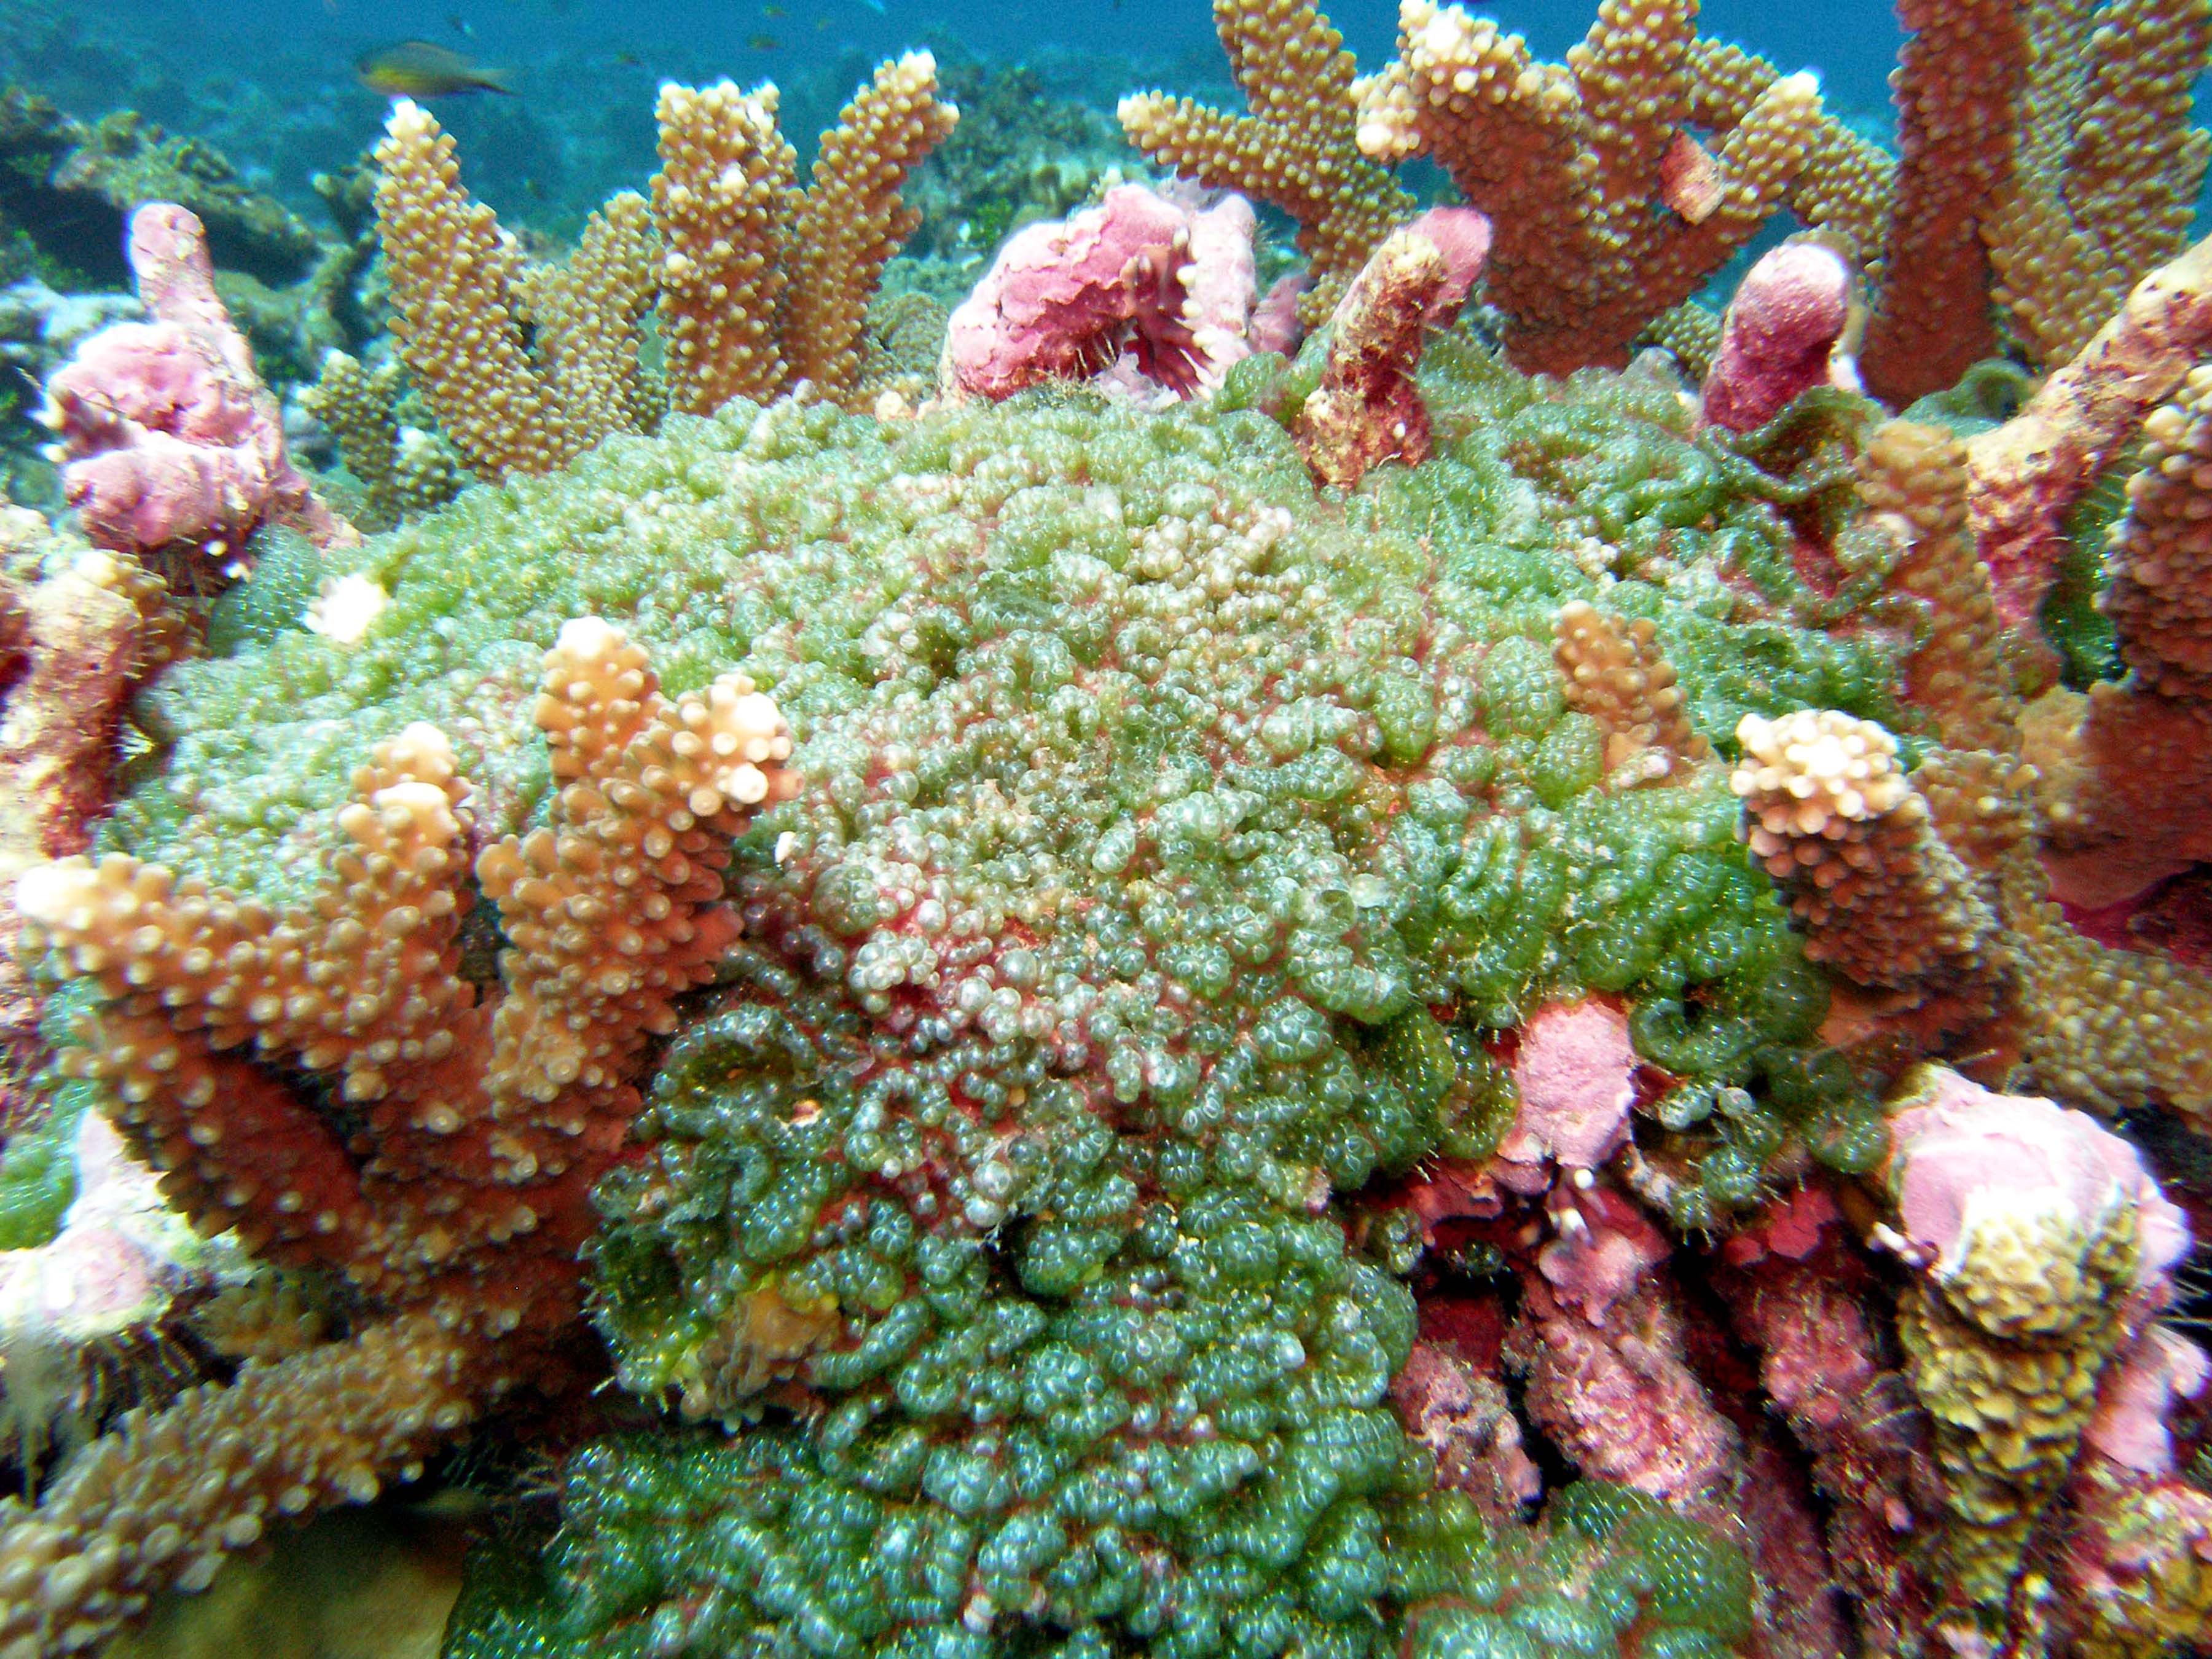 Fleshy algae may soon smother this otherwise healthy coral reef.